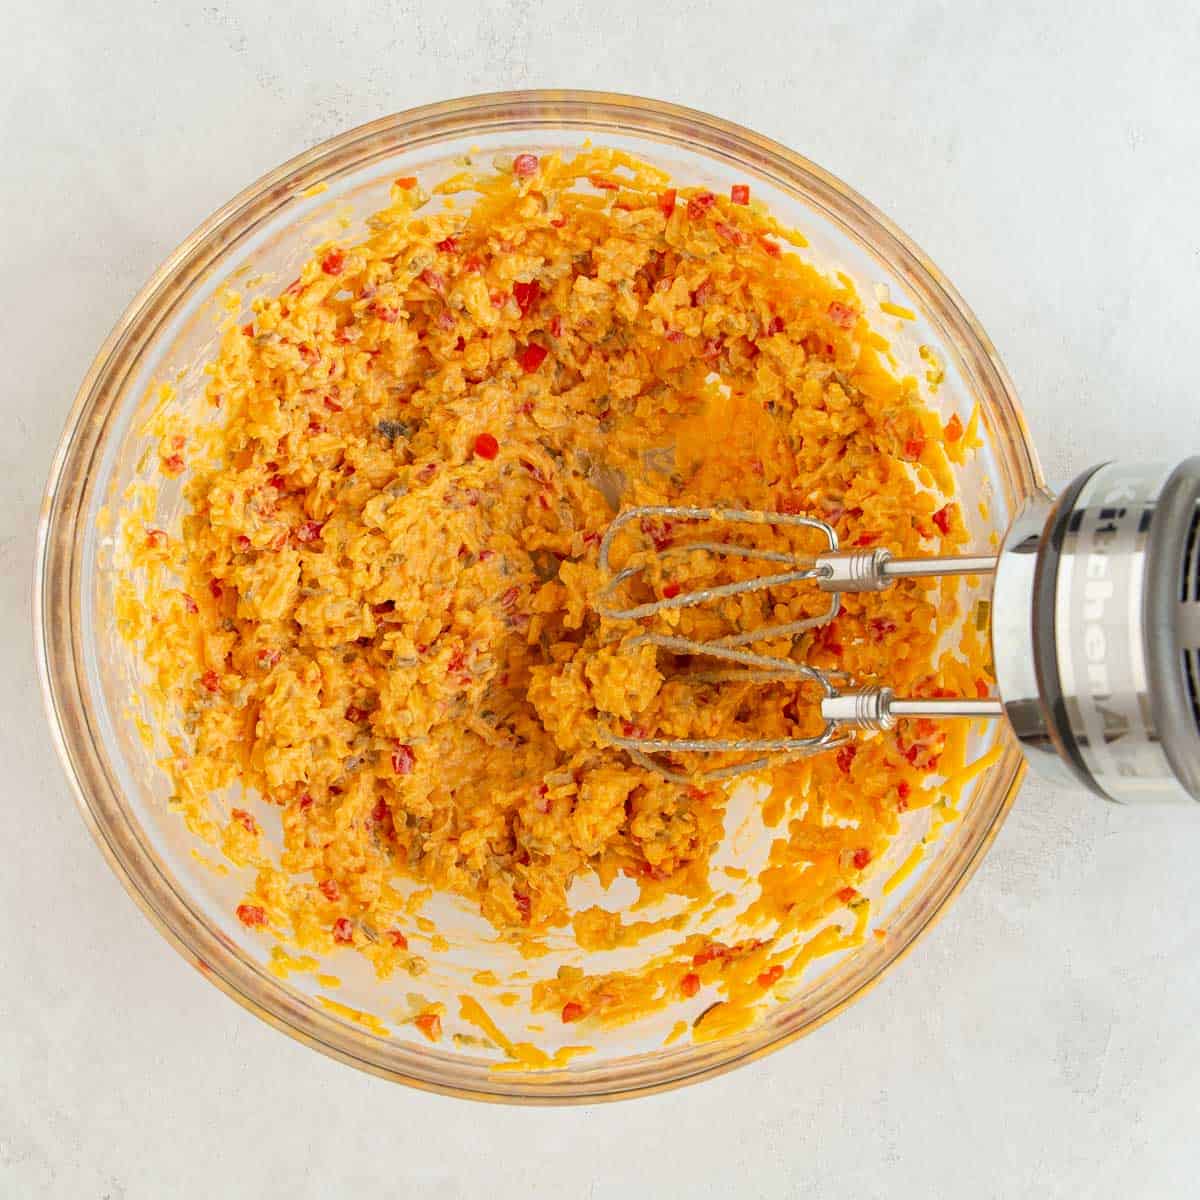 A hand mixer in a mixing bowl with pimento cheese spread.